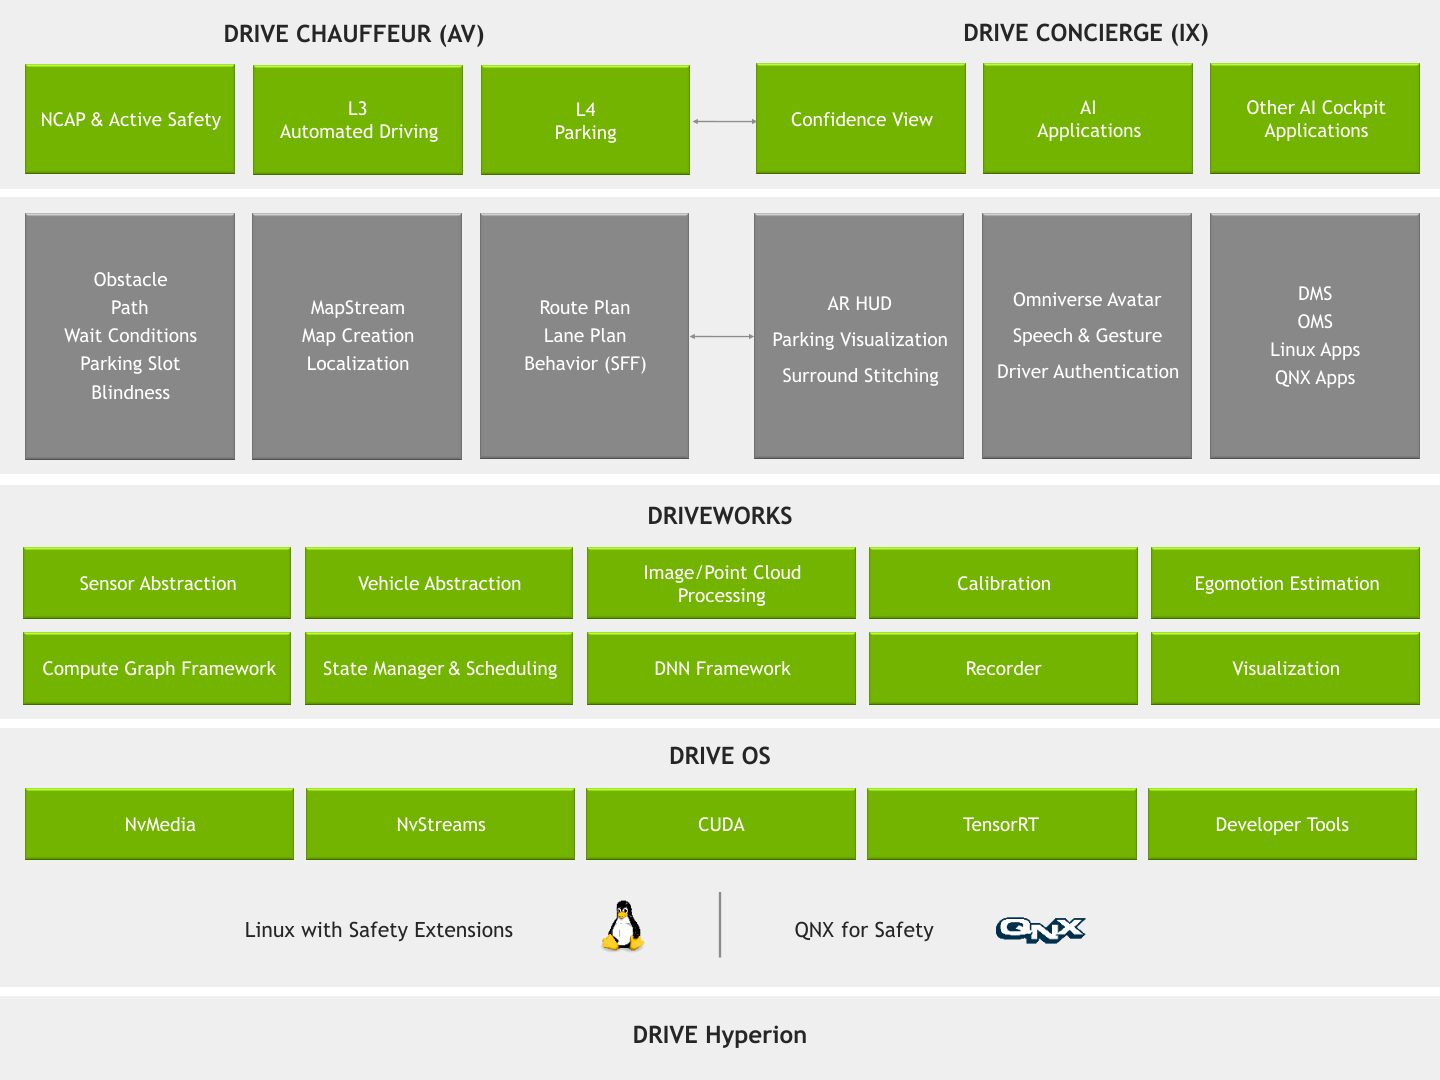 NVIDIA Drive OS Architecture overview